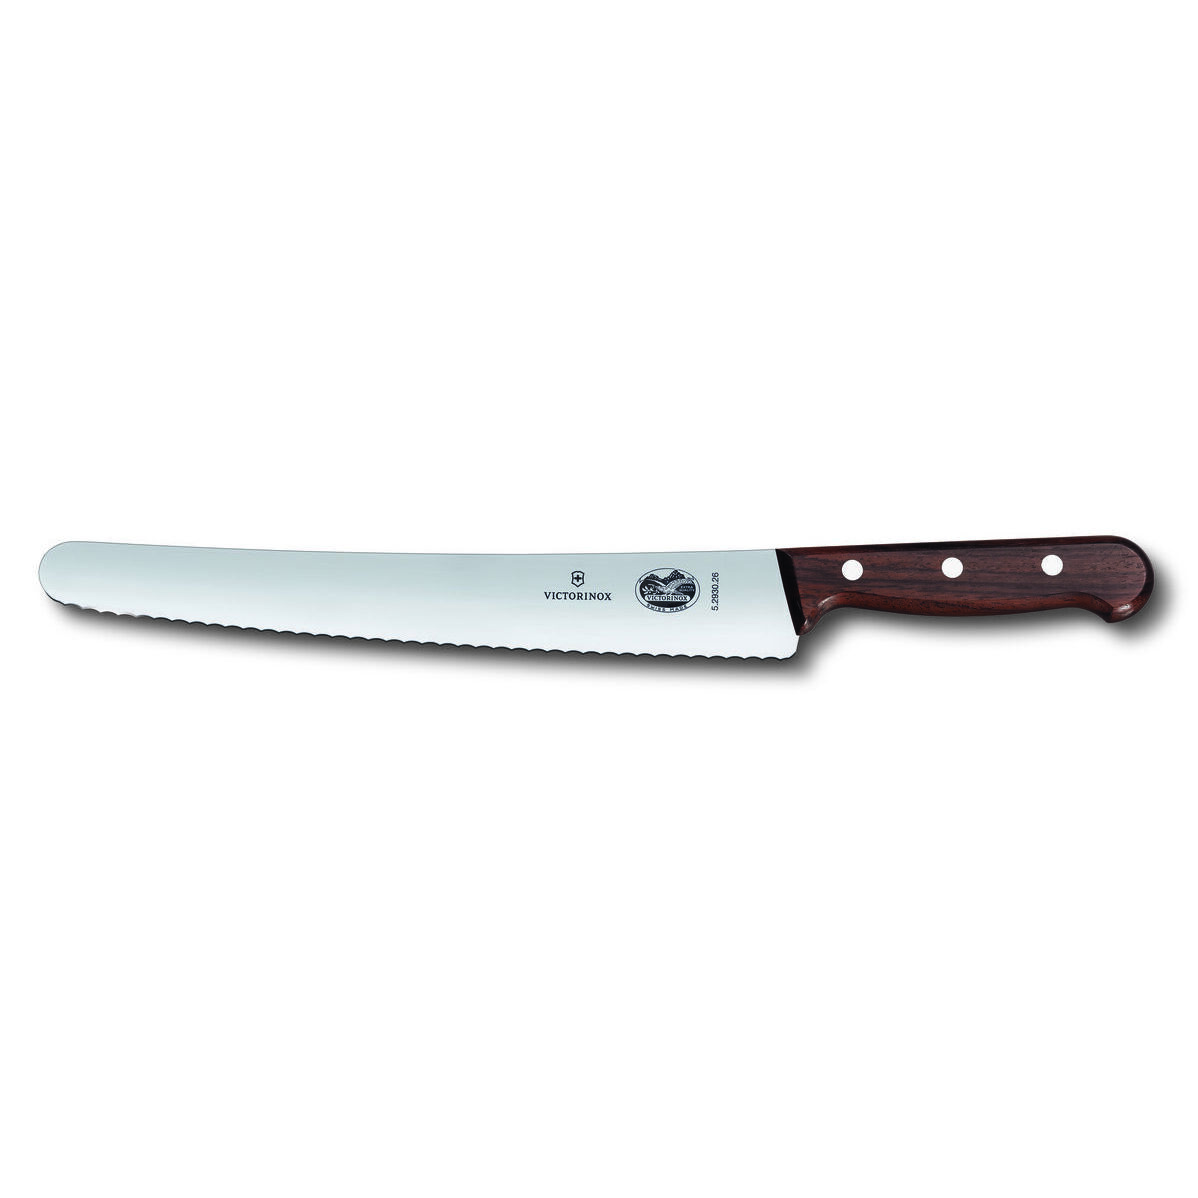 Pastry Knife Rosewood